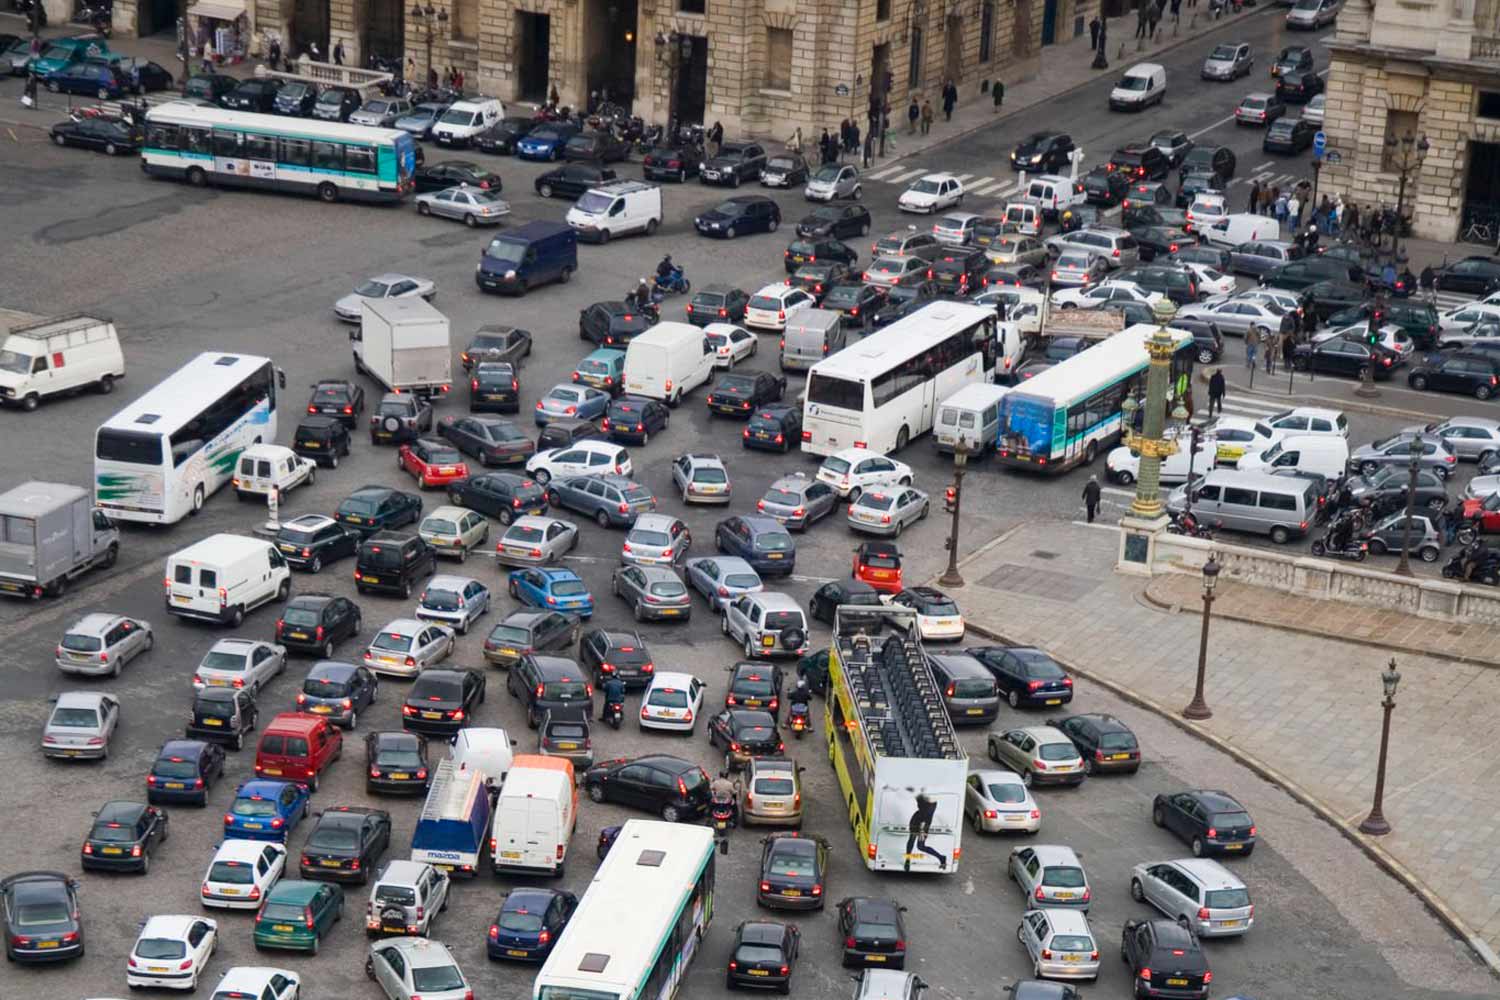 Unwritten Rules Tourists Need To Know Before Driving In Paris